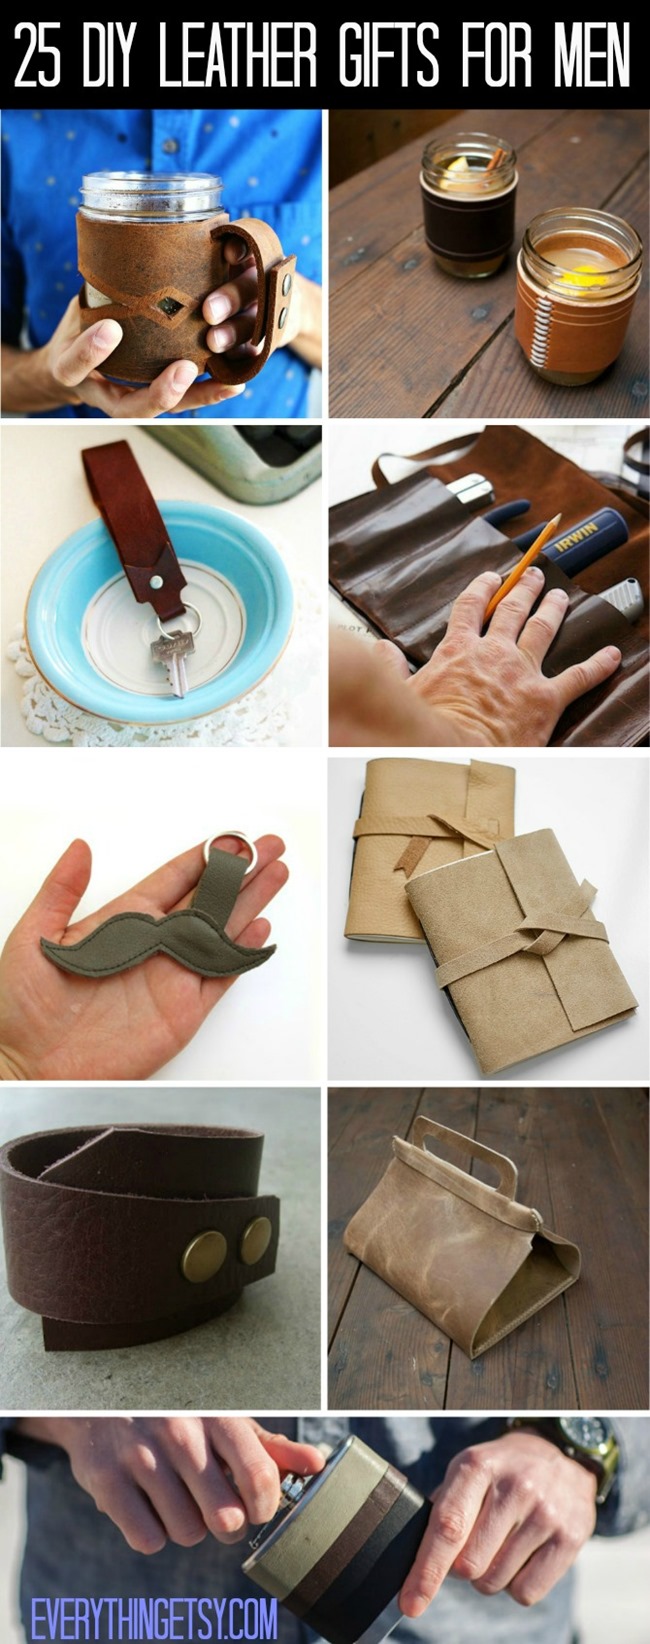 25 DIY Leather Gifts for Men - EverythingEtsy.com